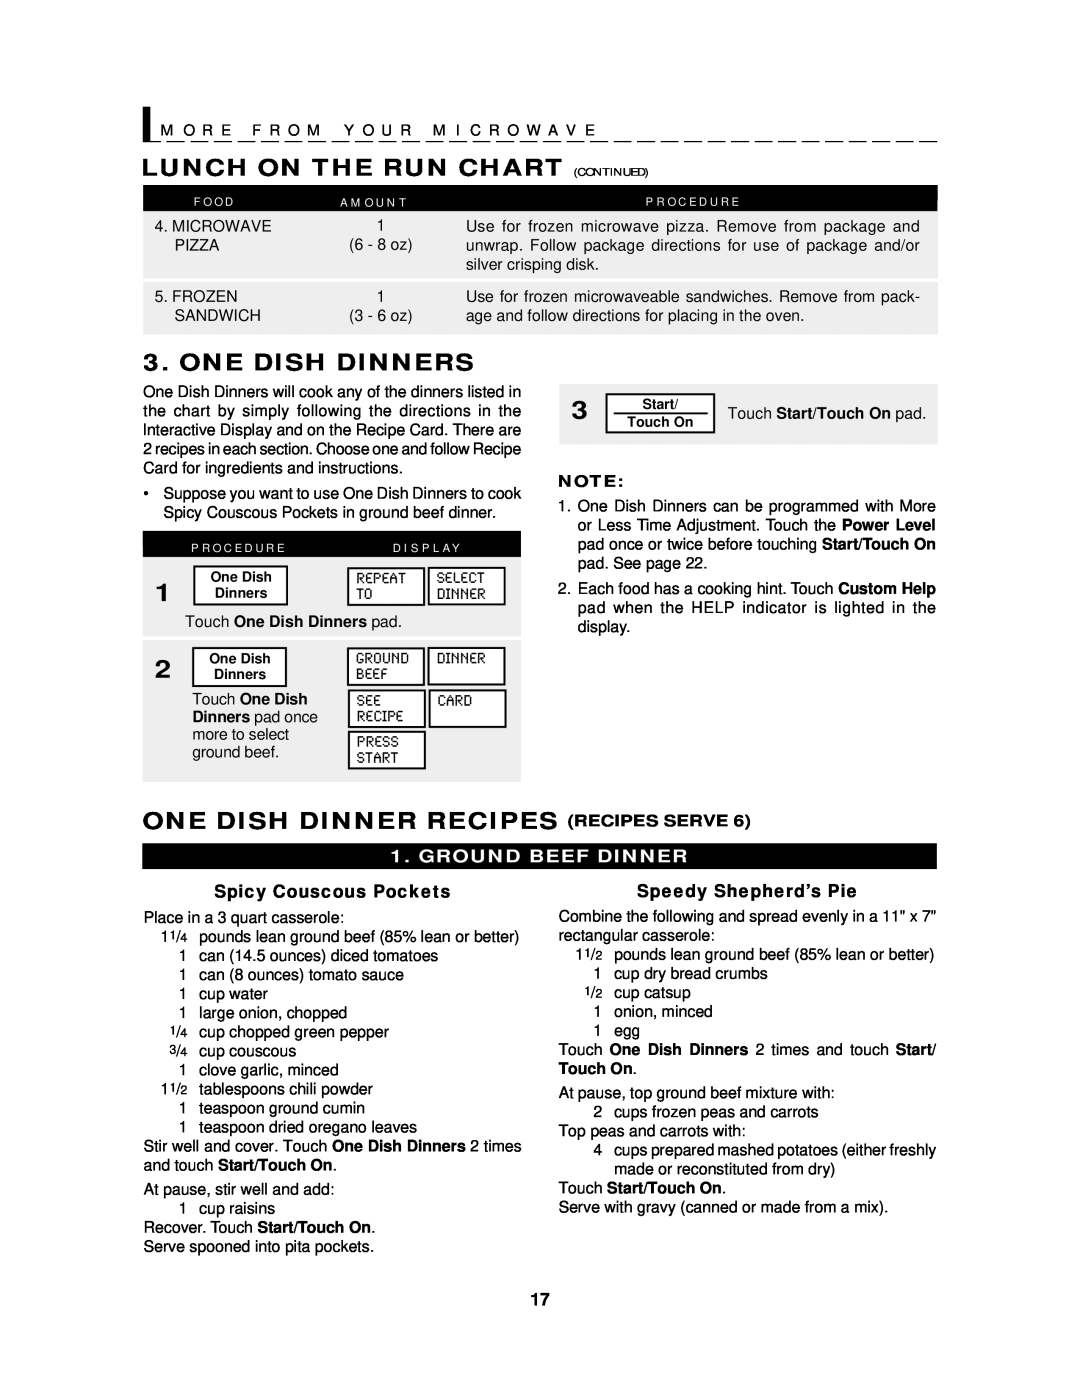 Sharp R-430D Lunch On The Run Chart Continued, One Dish Dinners, One Dish Dinner Recipes Recipes Serve, A M O U N T 